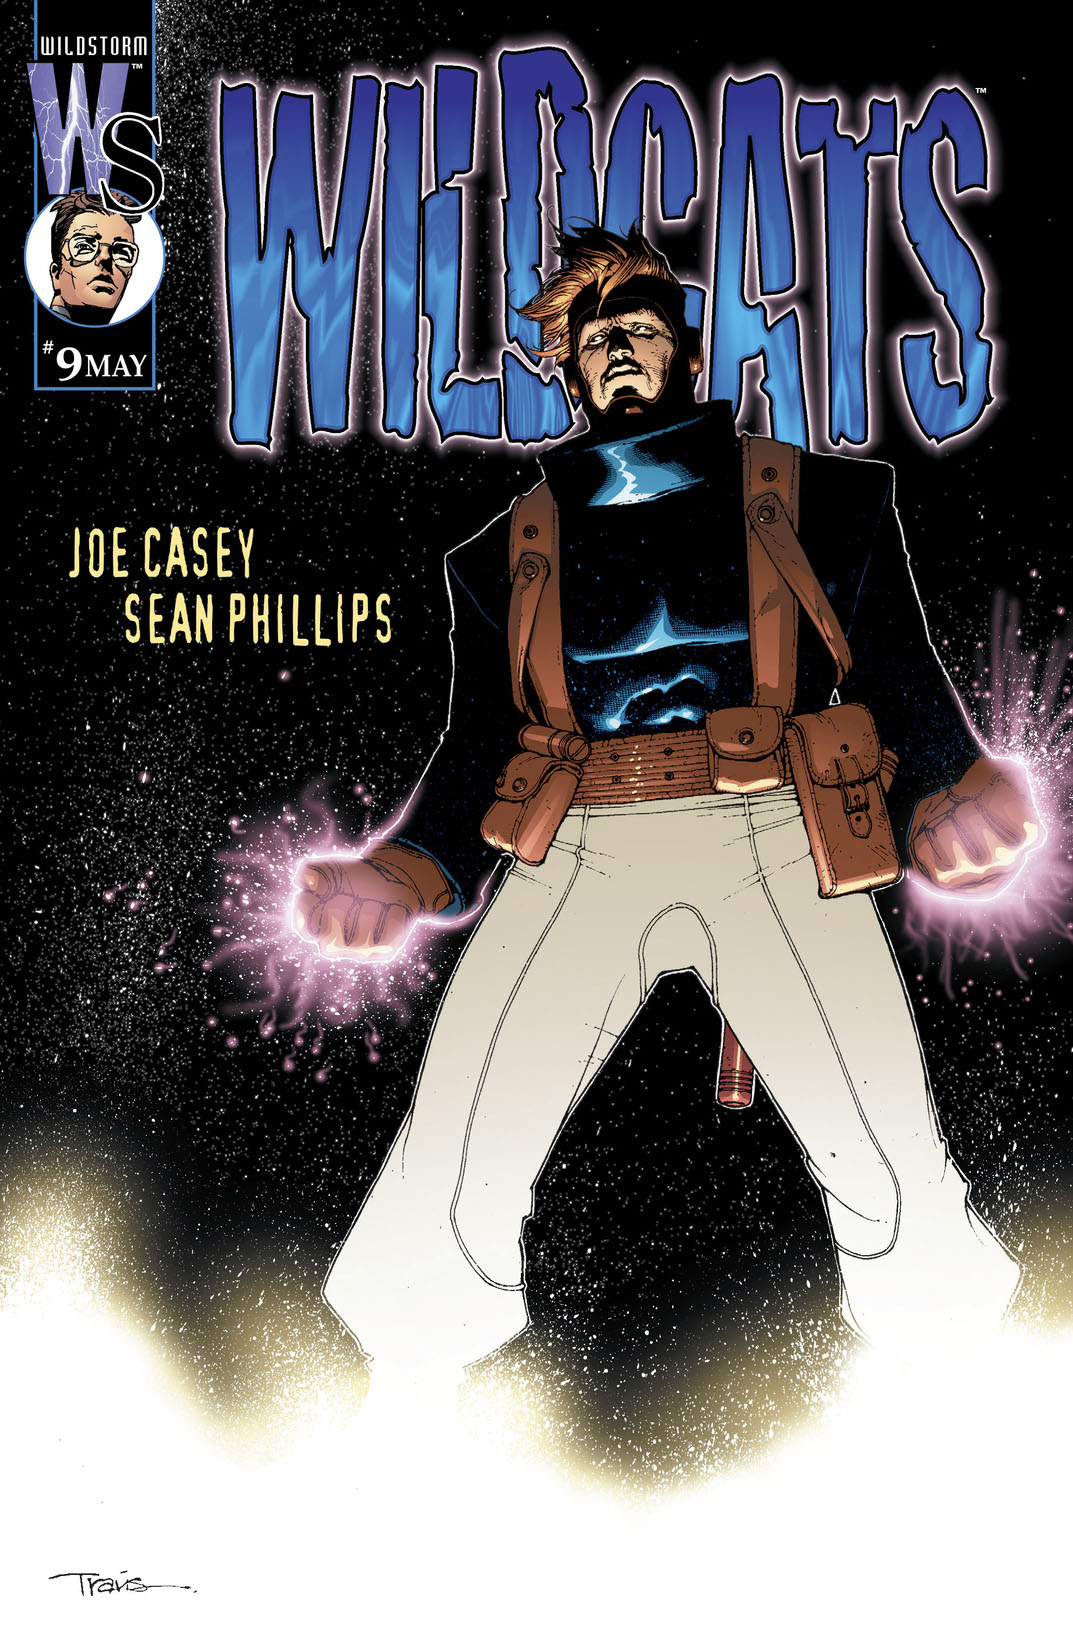 Wildcats Volume 2 (1999-) #9 preview images